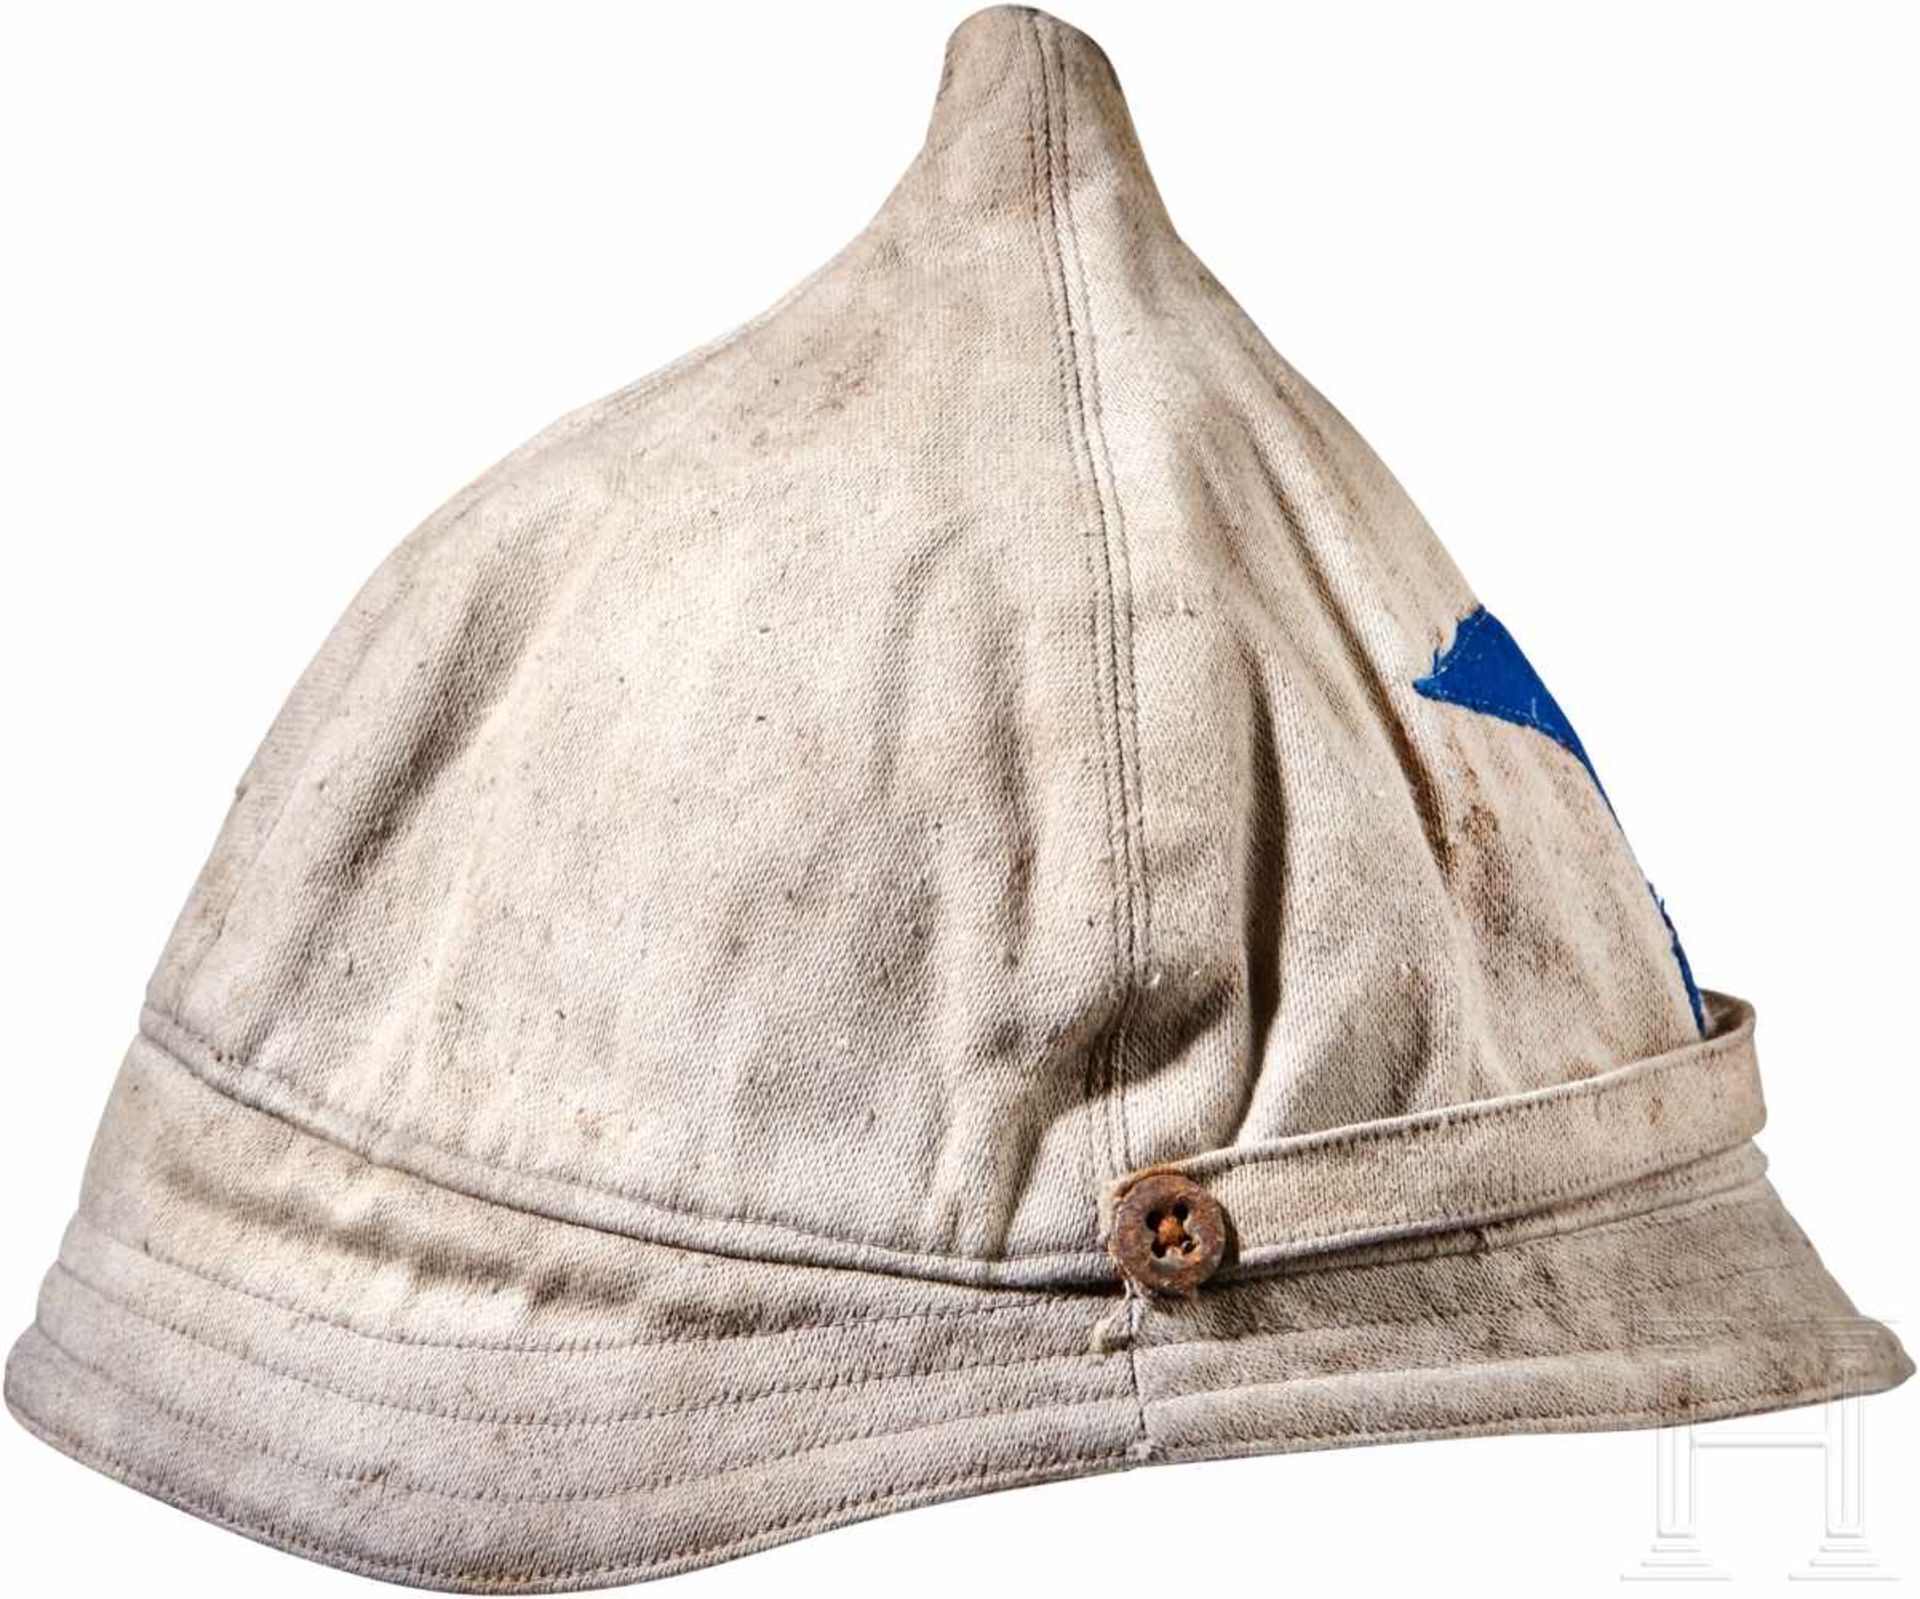 A White Budenovka CapWhite fabric summer "Budenovka" style cap used by troops in the civil war and - Bild 2 aus 9